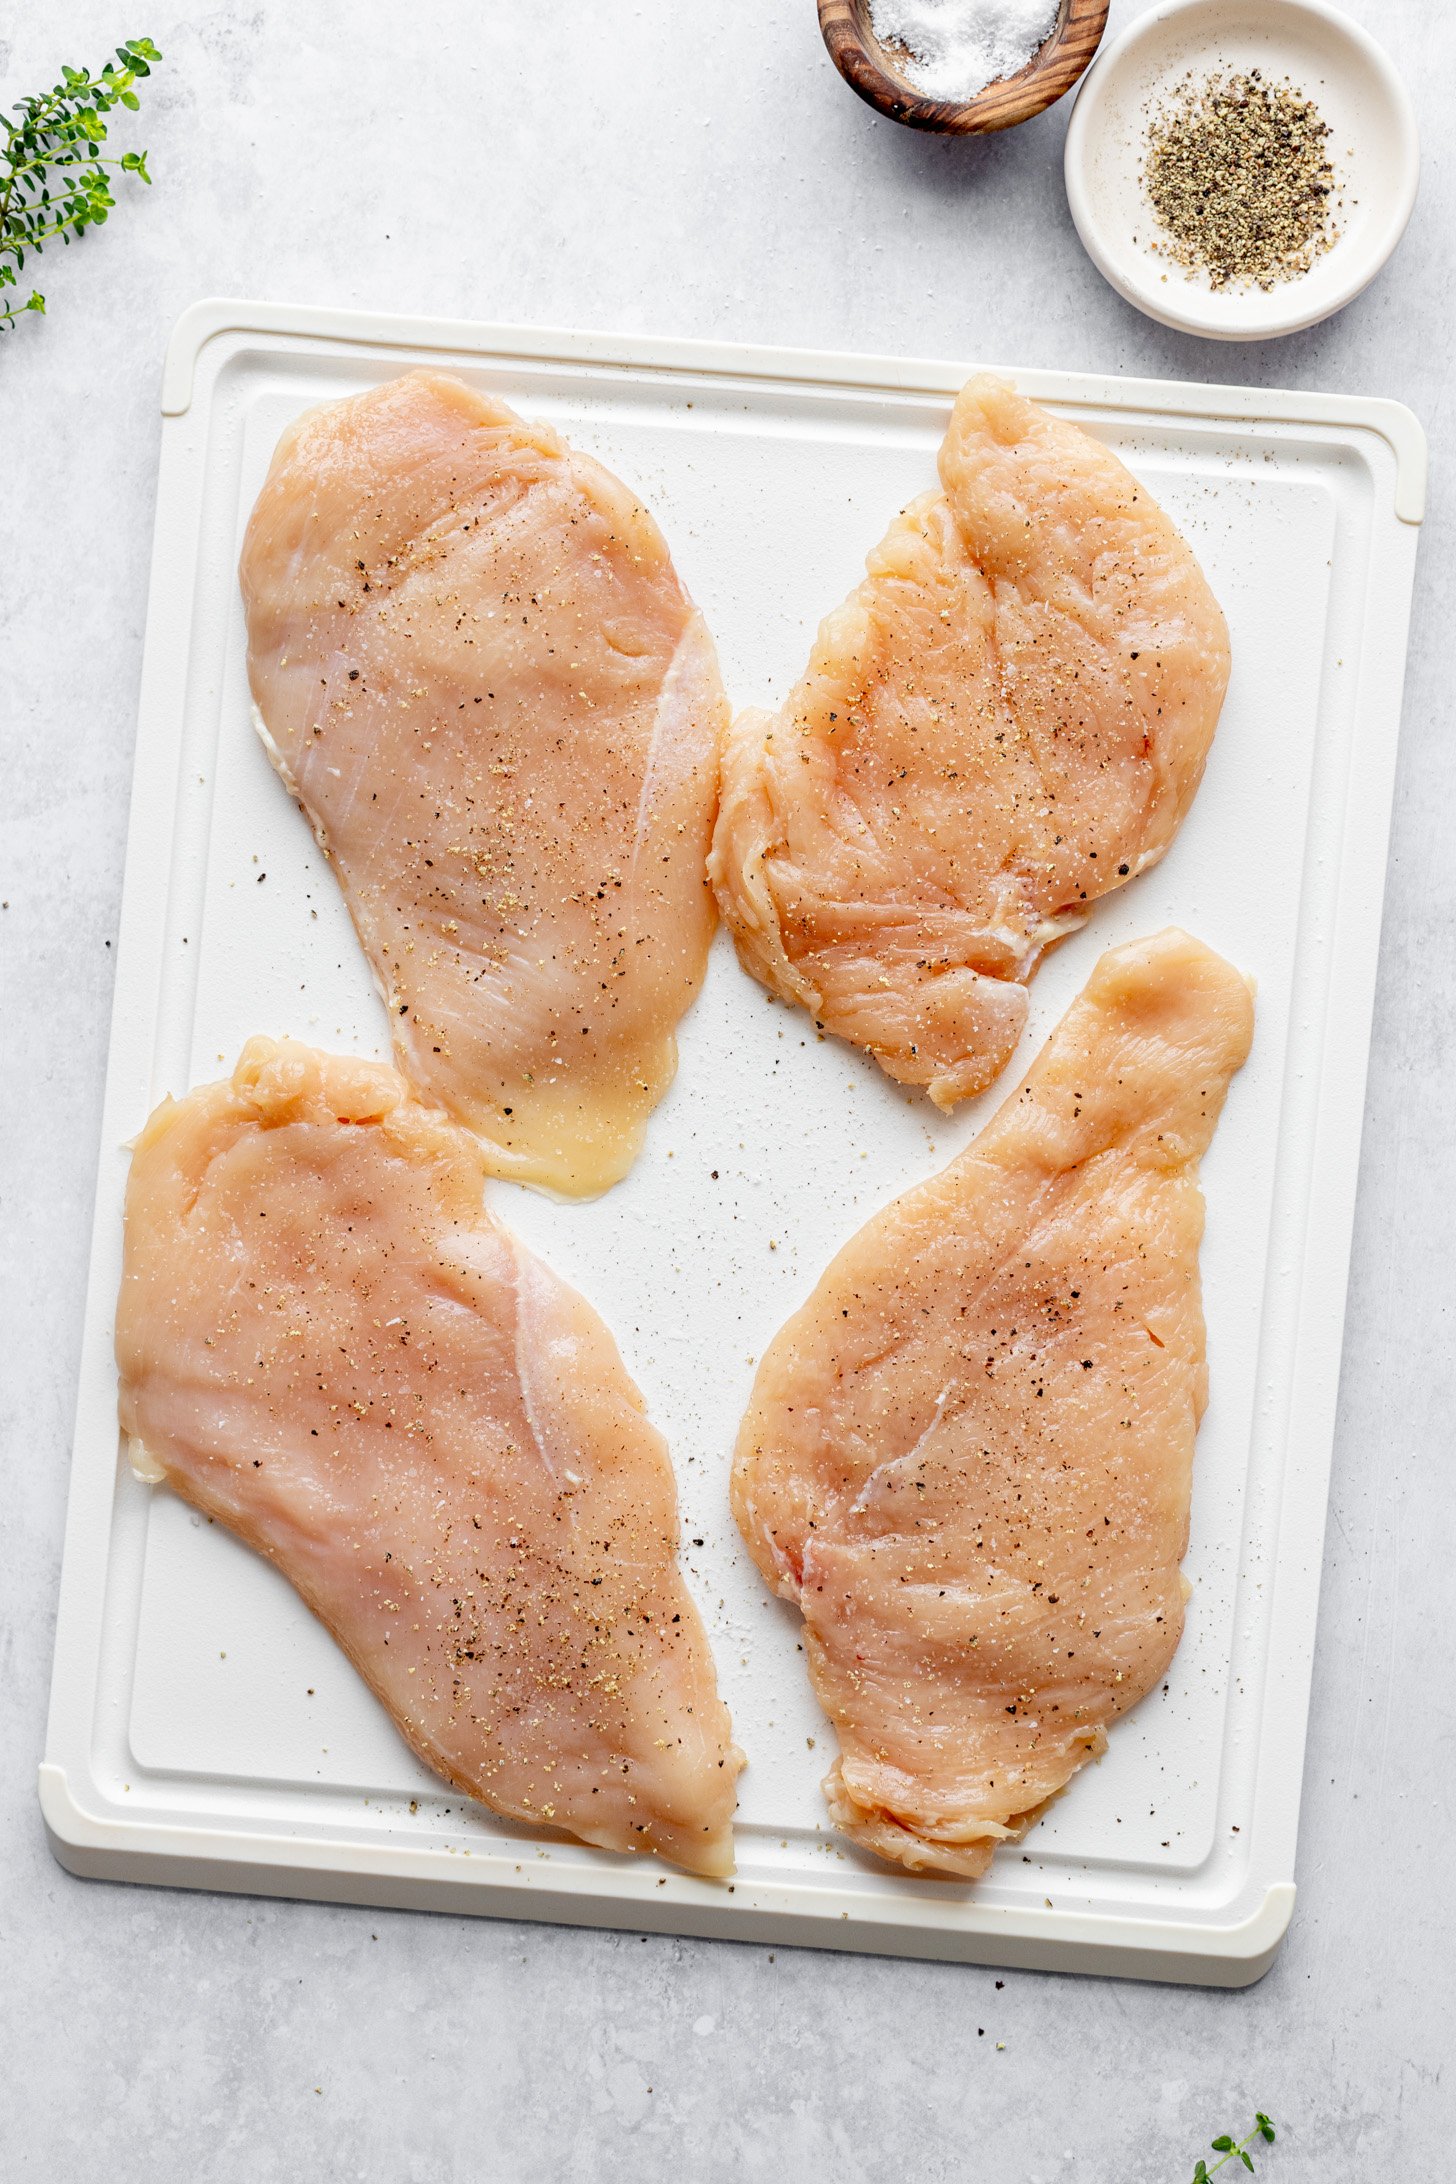 Four raw, flattened chicken breast halves seasoned with salt and pepper on a cutting board. The cutting board is sitting on a counter surrounded by a small bowl of salt, a small bowl of ground black pepper, and some fresh herbs.